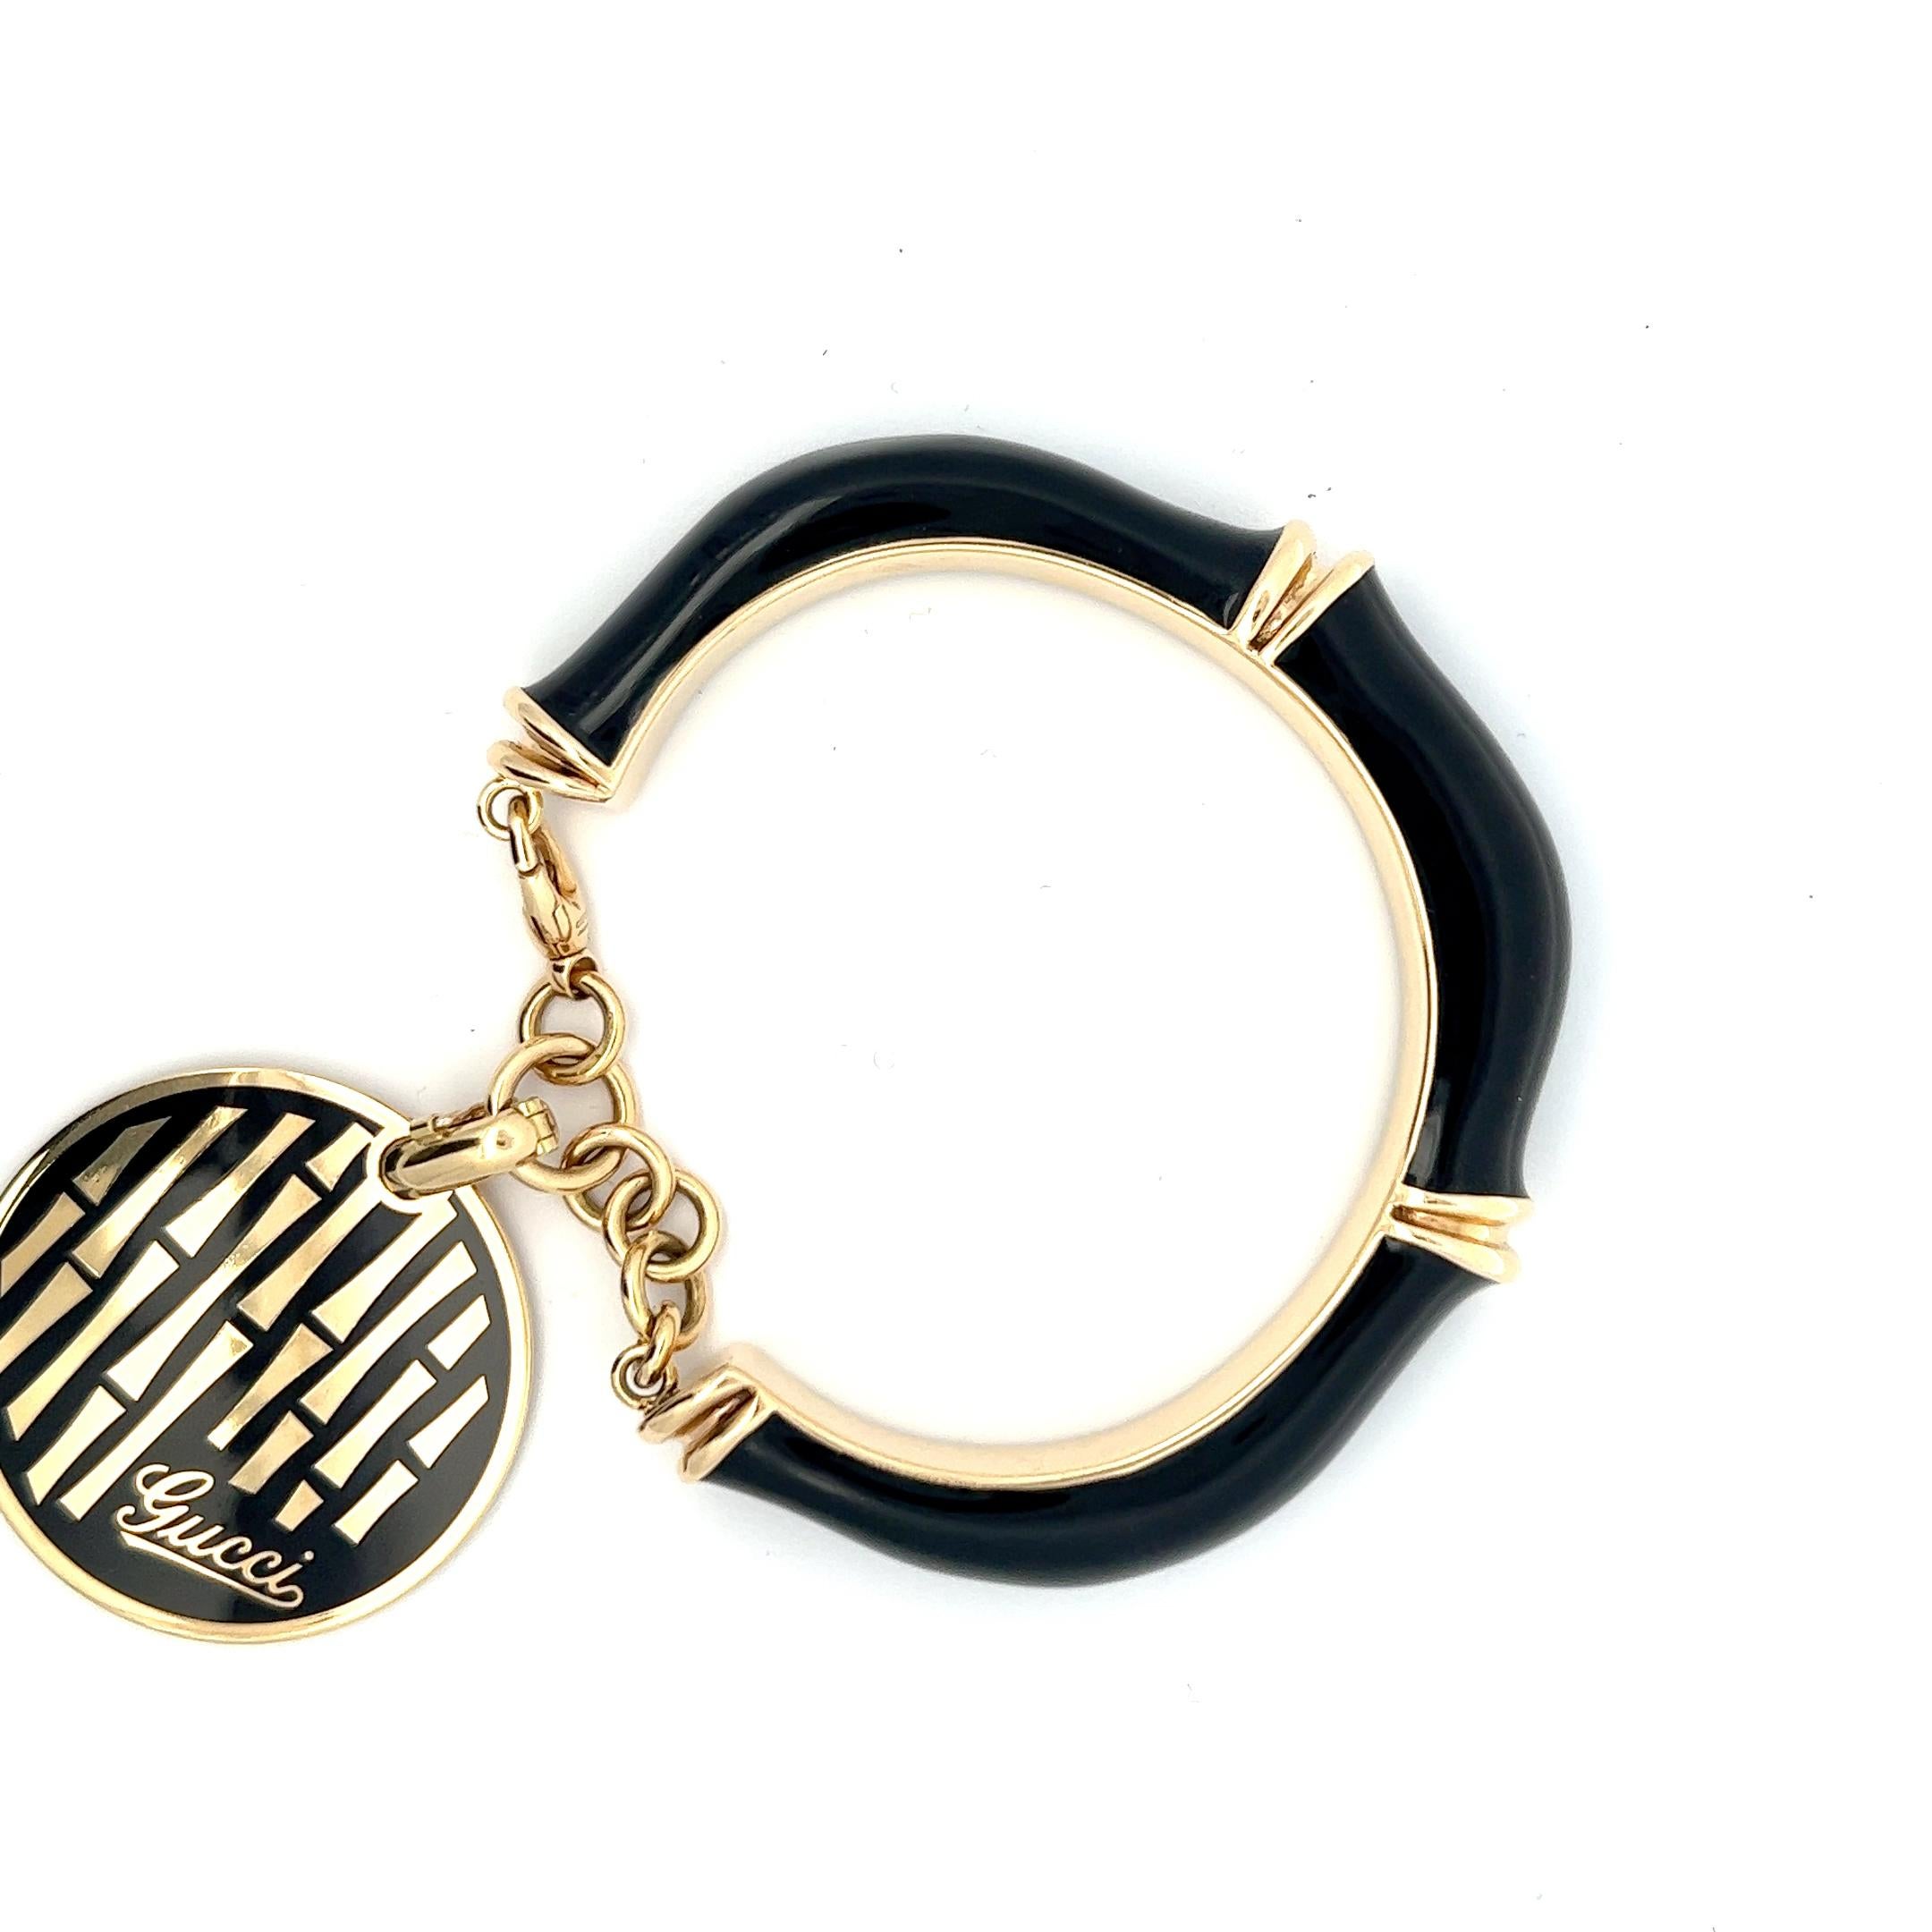 A 18k yellow gold and black enamel bracelet by Gucci.
Made in Florence, Italy, circa 1980.
Size 18.
Marked with the Italian hallmark for 18k gold and an Italian makers for Florence. 
Signed: Gucci. 
Stamped with 18 and Made in Italy.
The round